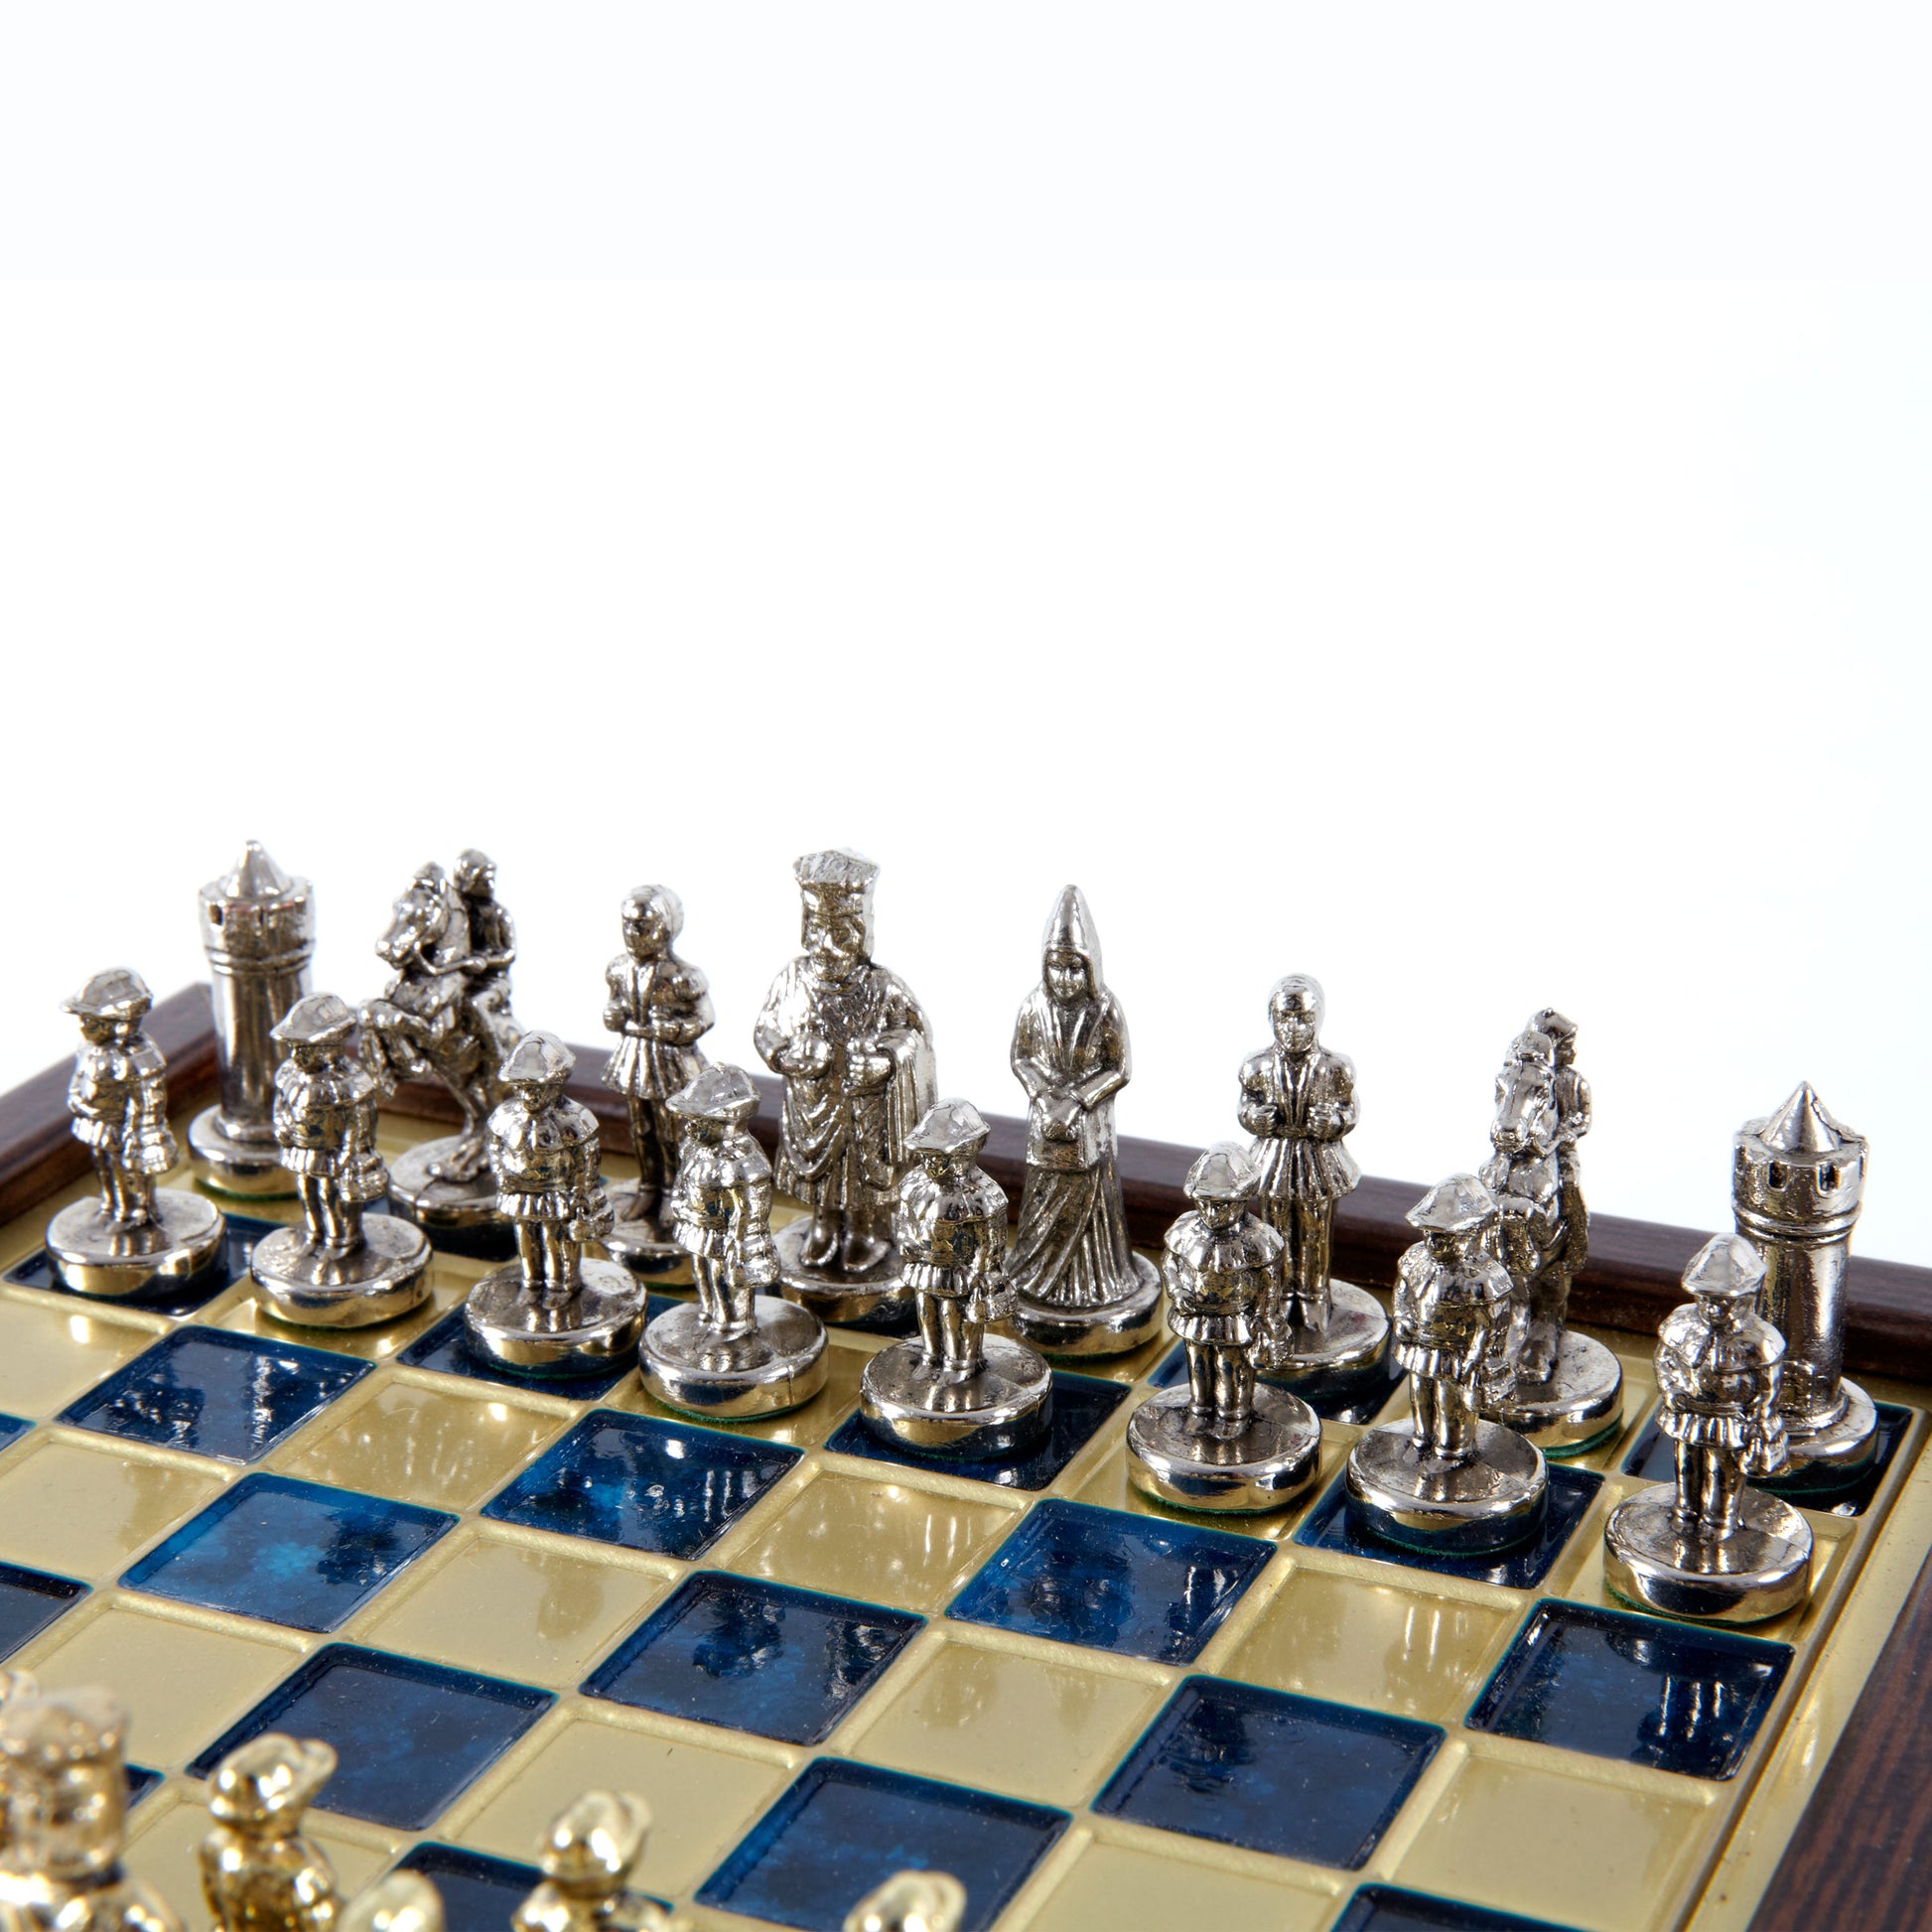 BYZANTINE EMPIRE CHESS SET In Wooden Box With Storage with gold/silver chessmen and bronze chessboard 20 x 20cm (Extra Small) - Premium Chess from MANOPOULOS Chess & Backgammon - Just €79! Shop now at MANOPOULOS Chess & Backgammon